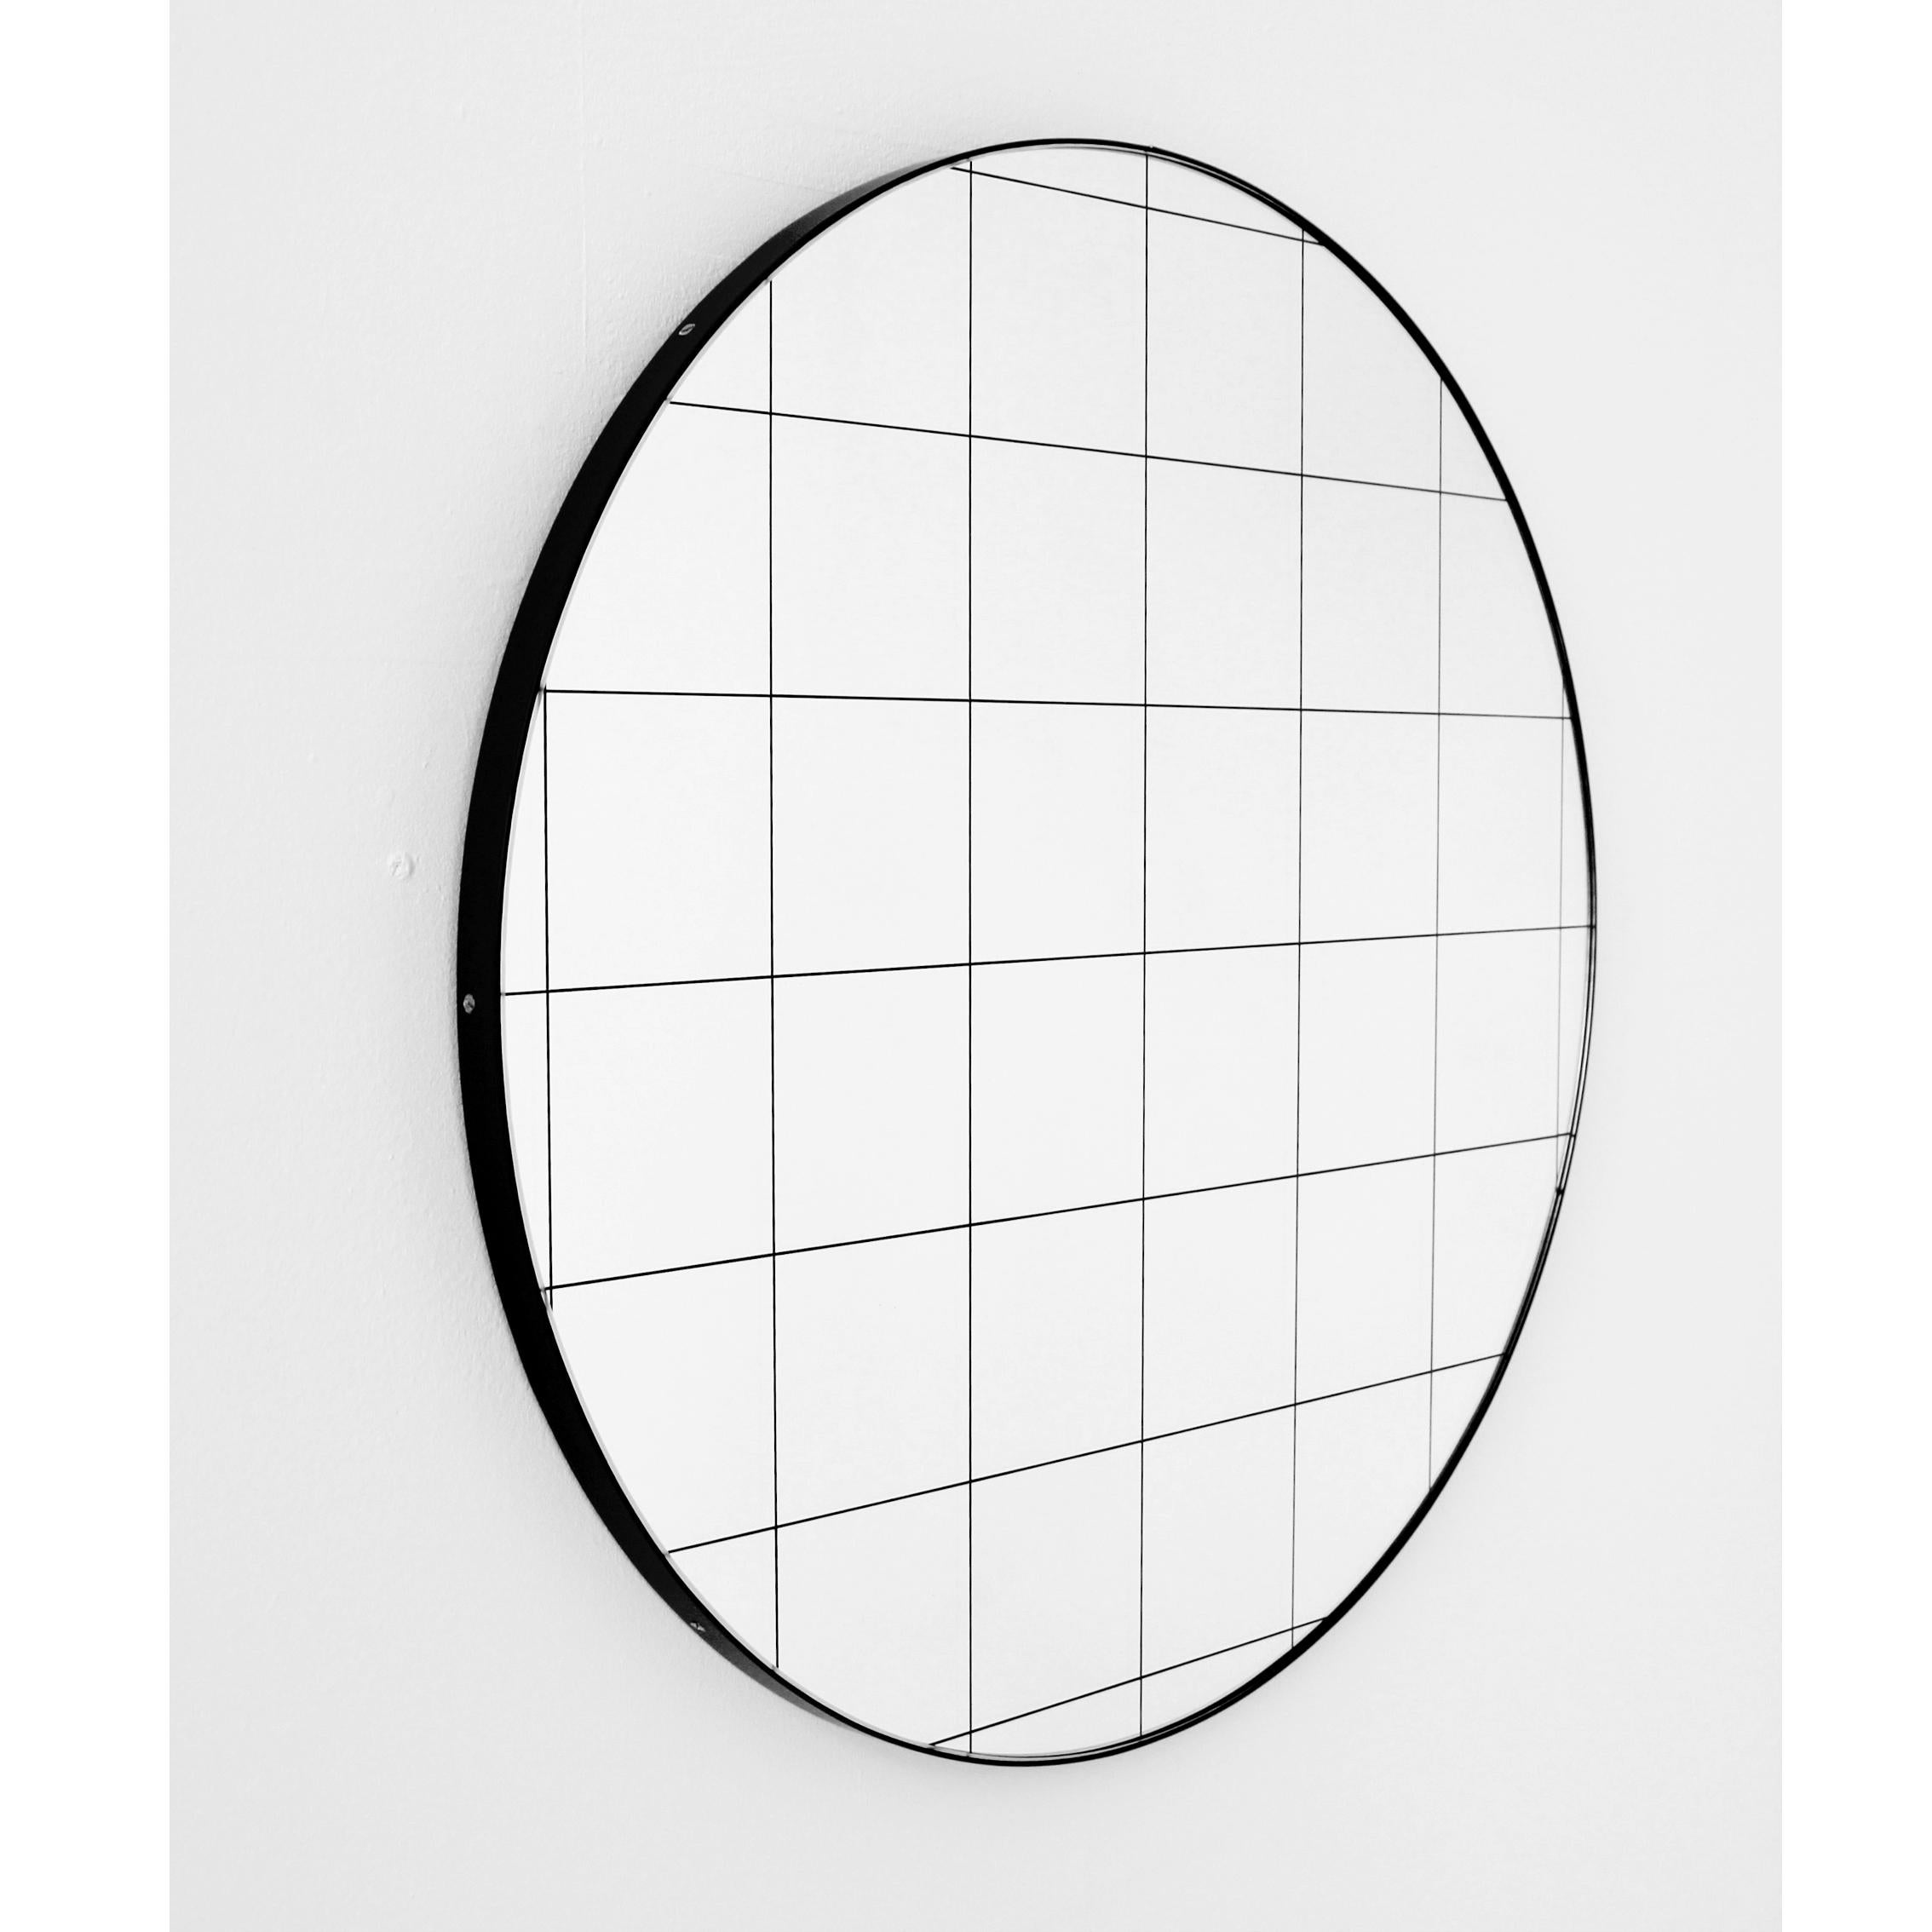 Delightful crafted silver round mirror with an elegant black frame and black grid.

Ideal above a console table in the hallway, above a beautiful fireplace, in the bedroom or in the bathroom.

Design tip: Looks stunning used as a cluster in